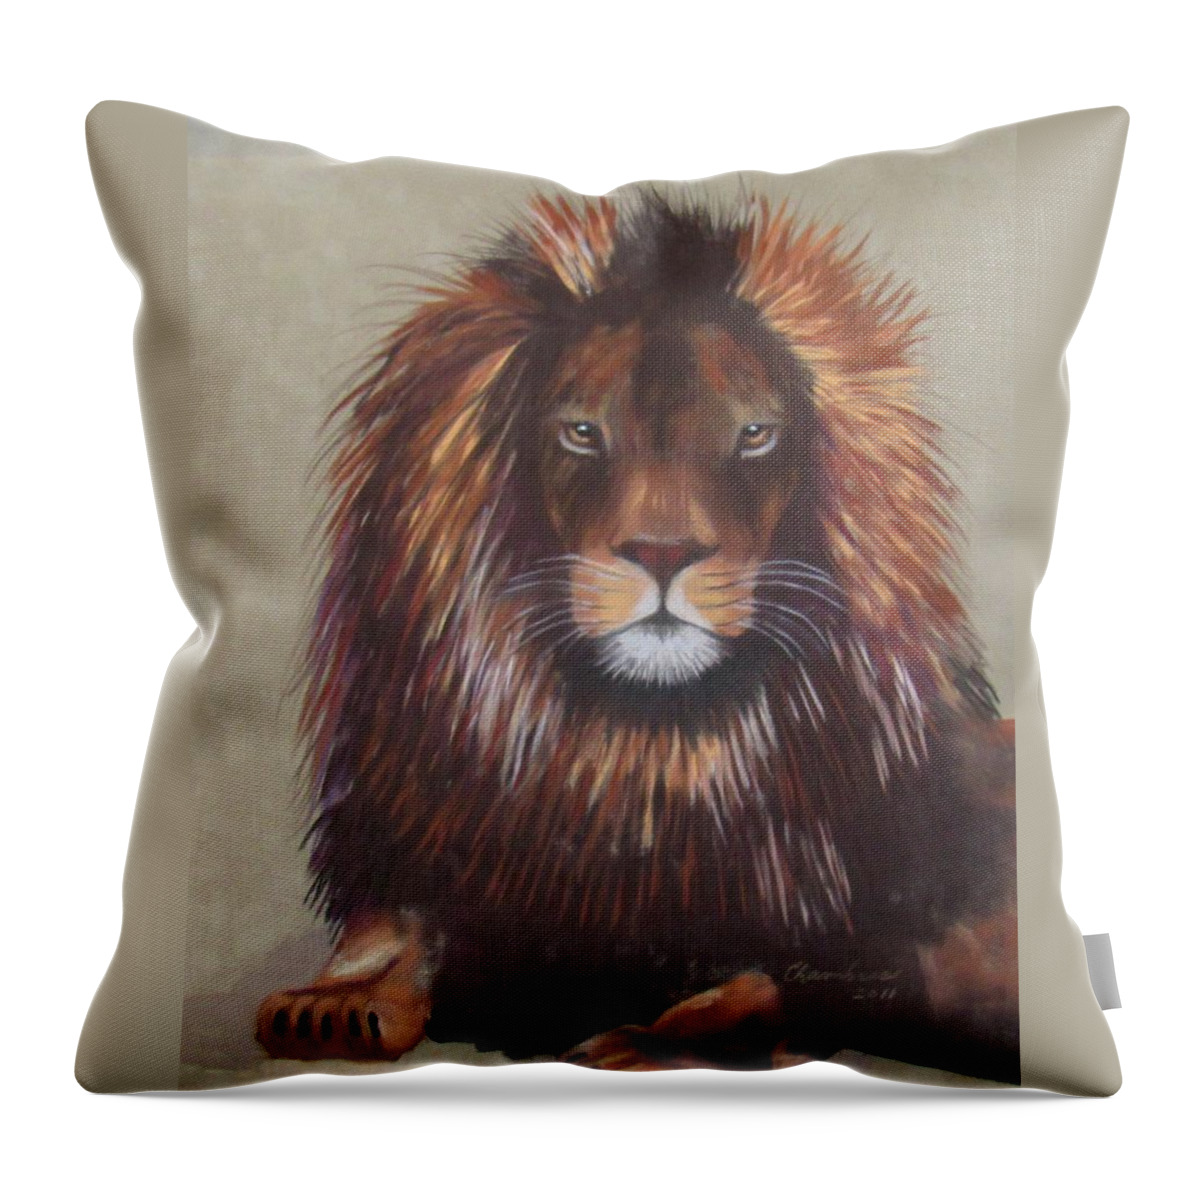 Lion Throw Pillow featuring the painting Lion by Donna Chambers